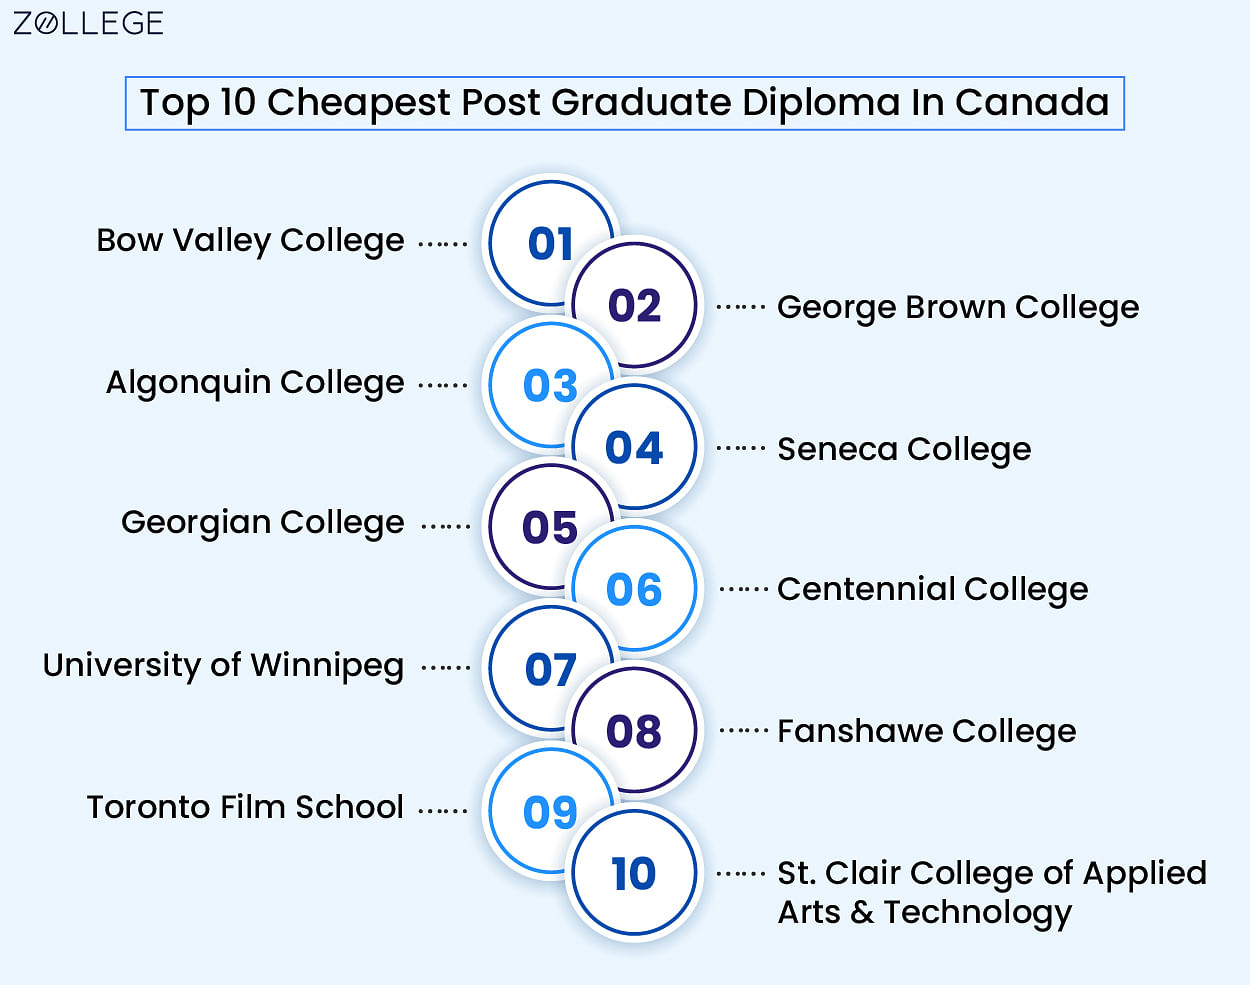 Cheapest Post Graduate Diploma In Canada for International Students